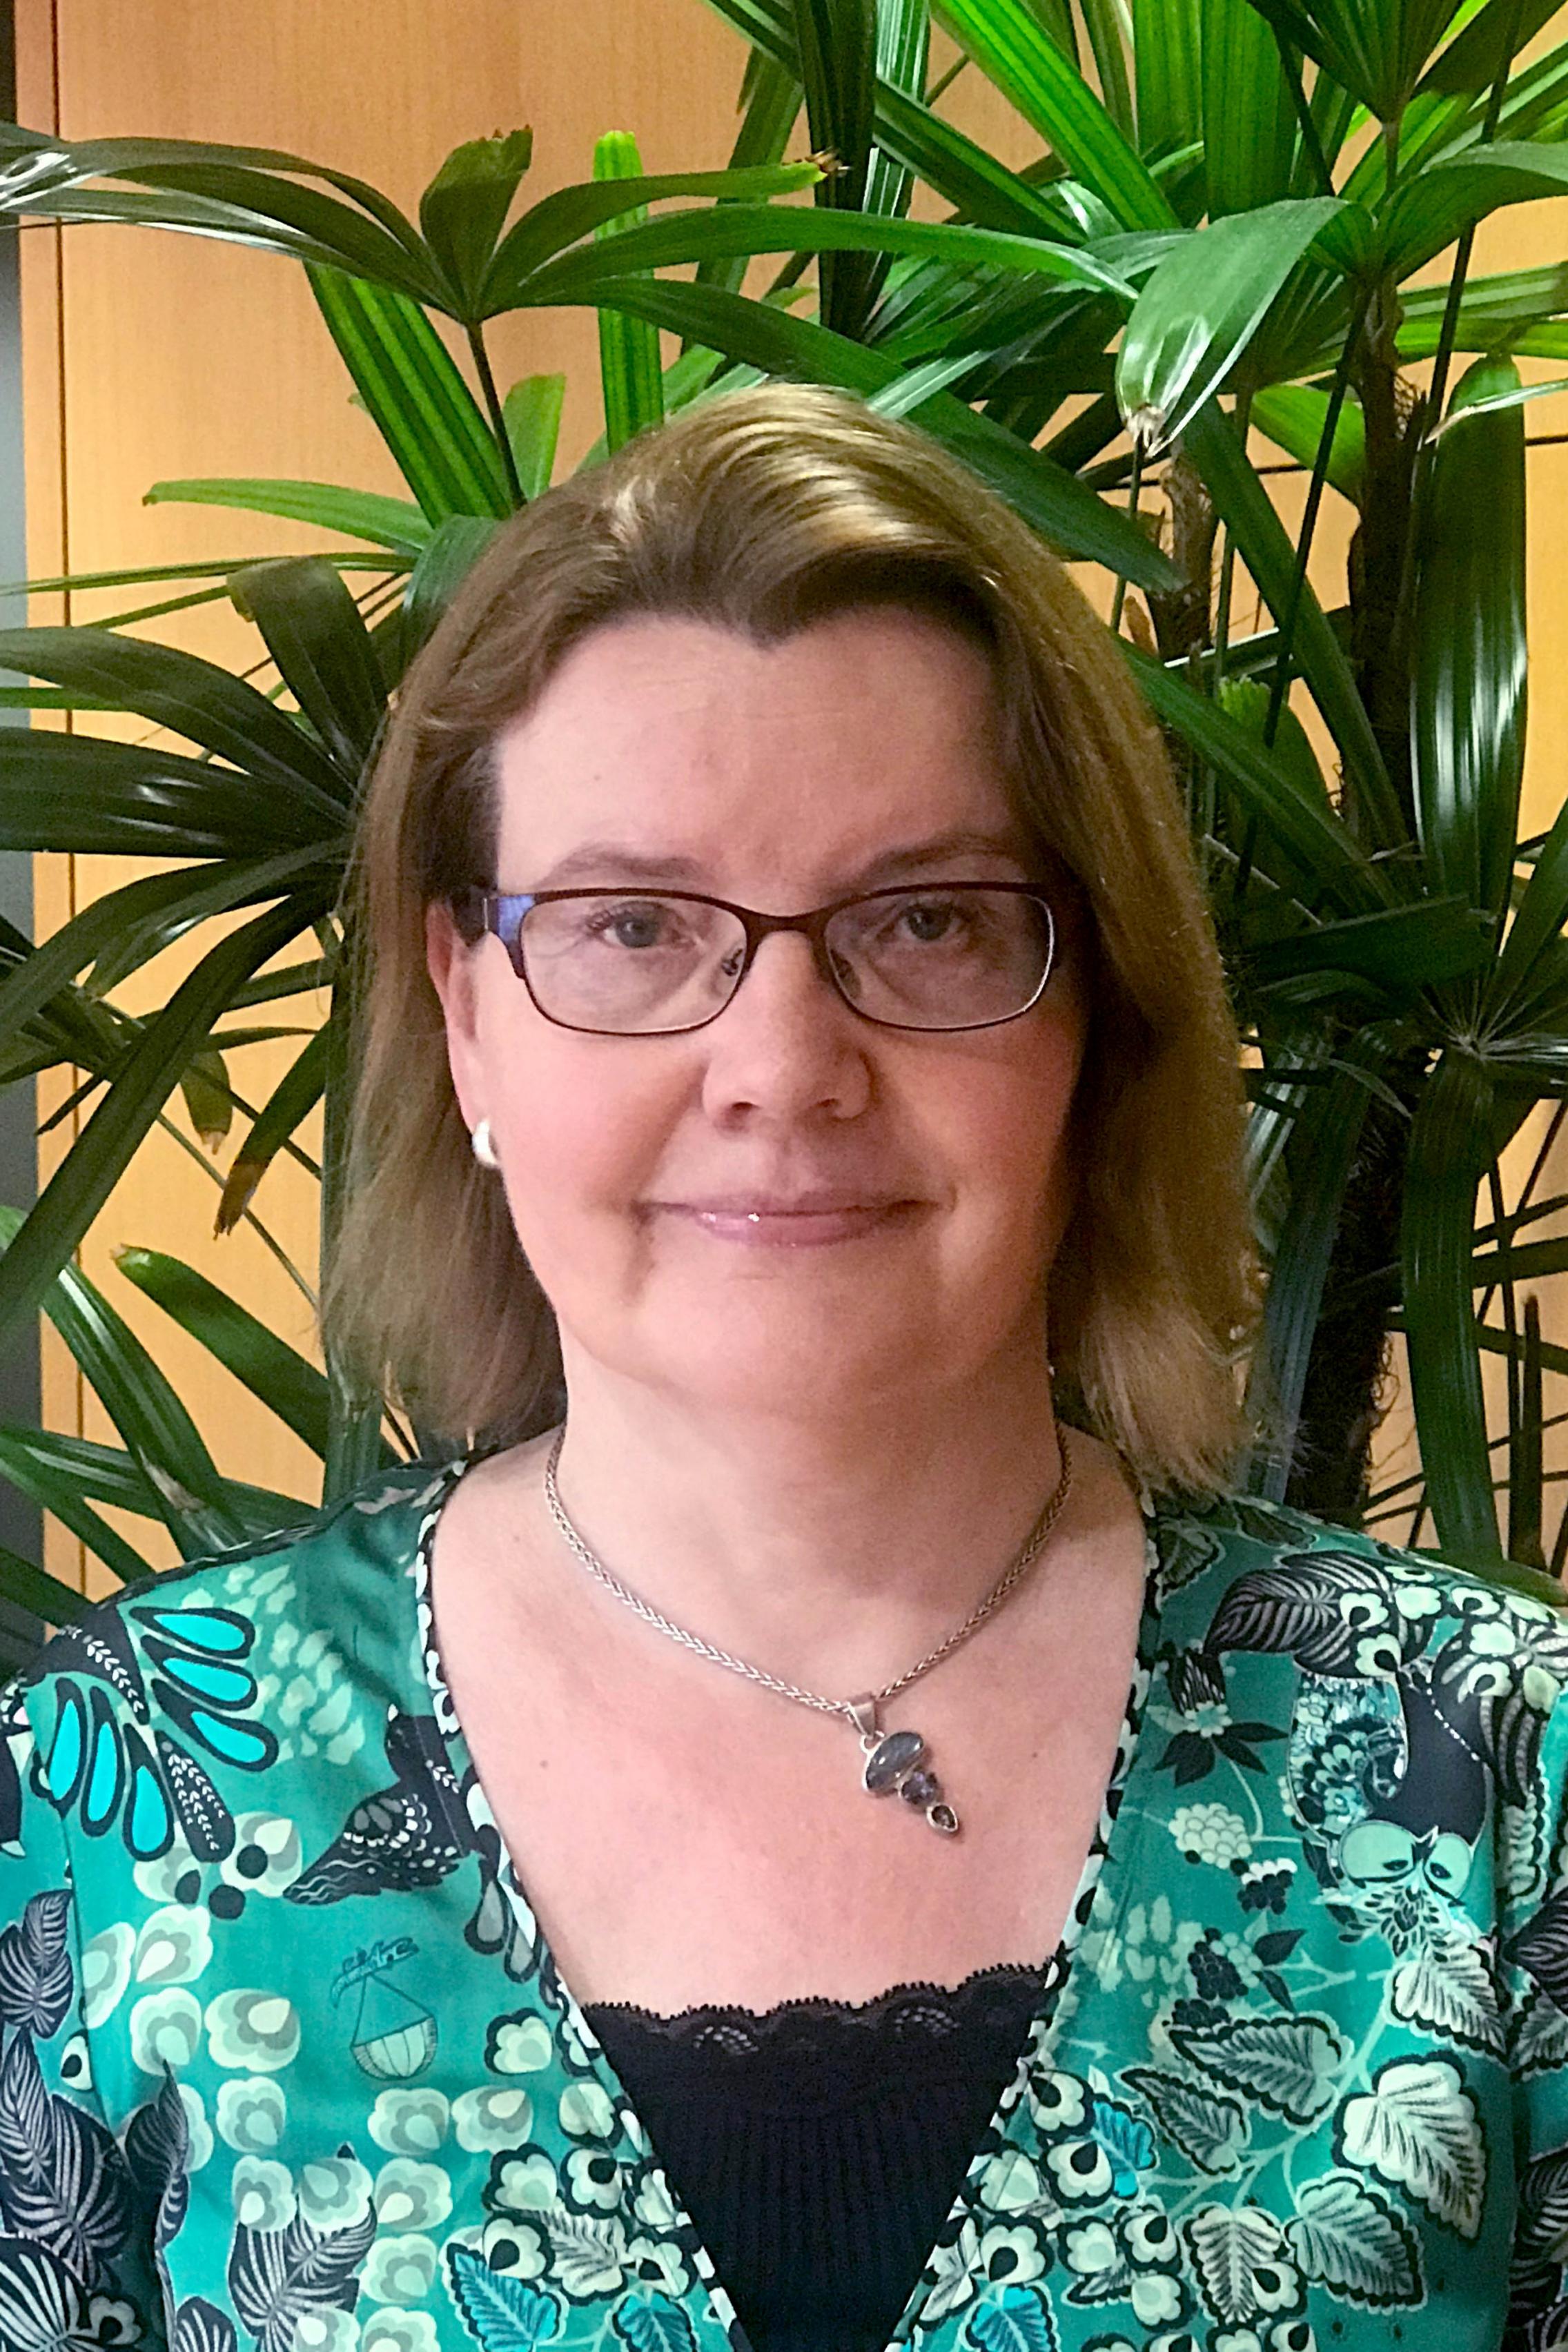 Dr Maria Saarela has been named Research Director, Food Sciences at the South Australian Research and Development Institute (SARDI)